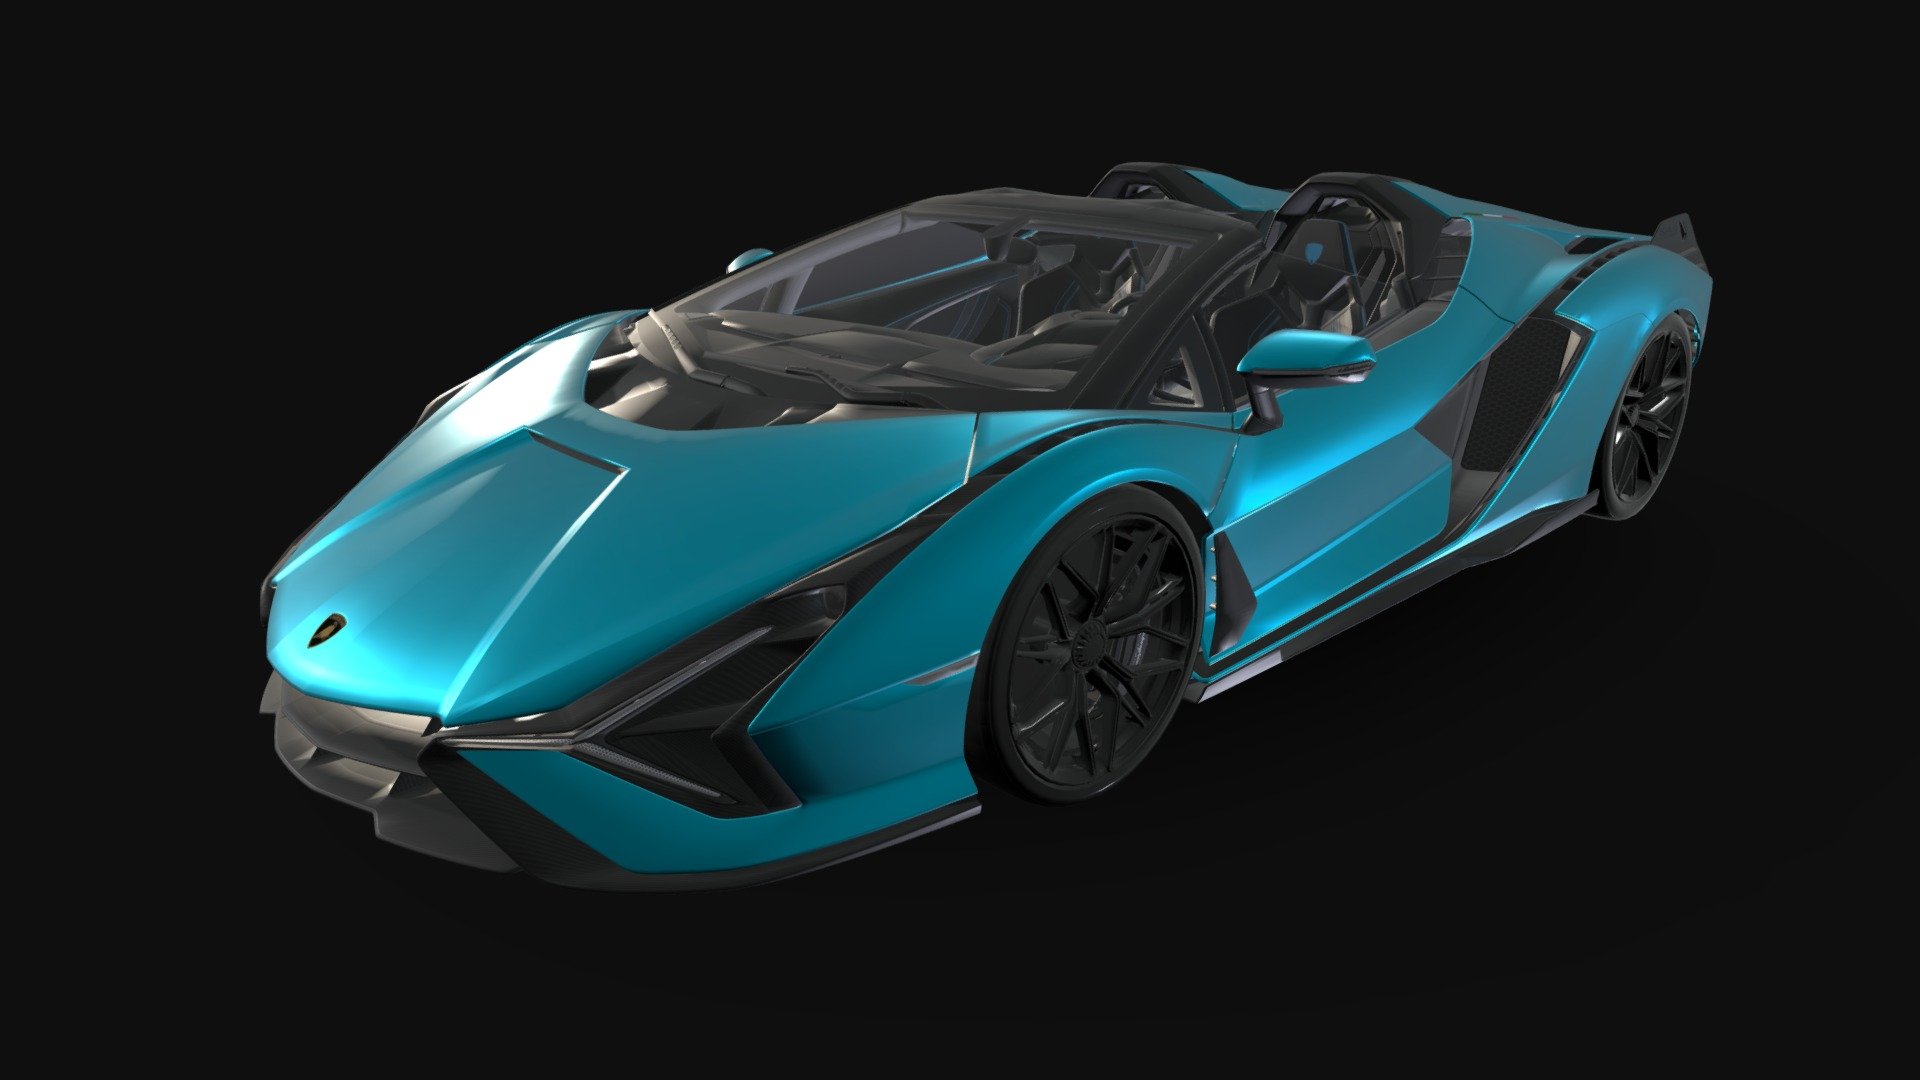 This is a 3D-Model of an Lamborghini Sian Roadster by Lamborghini - Lamborghini Sian Roadster - 3D model by Navarion 3d model